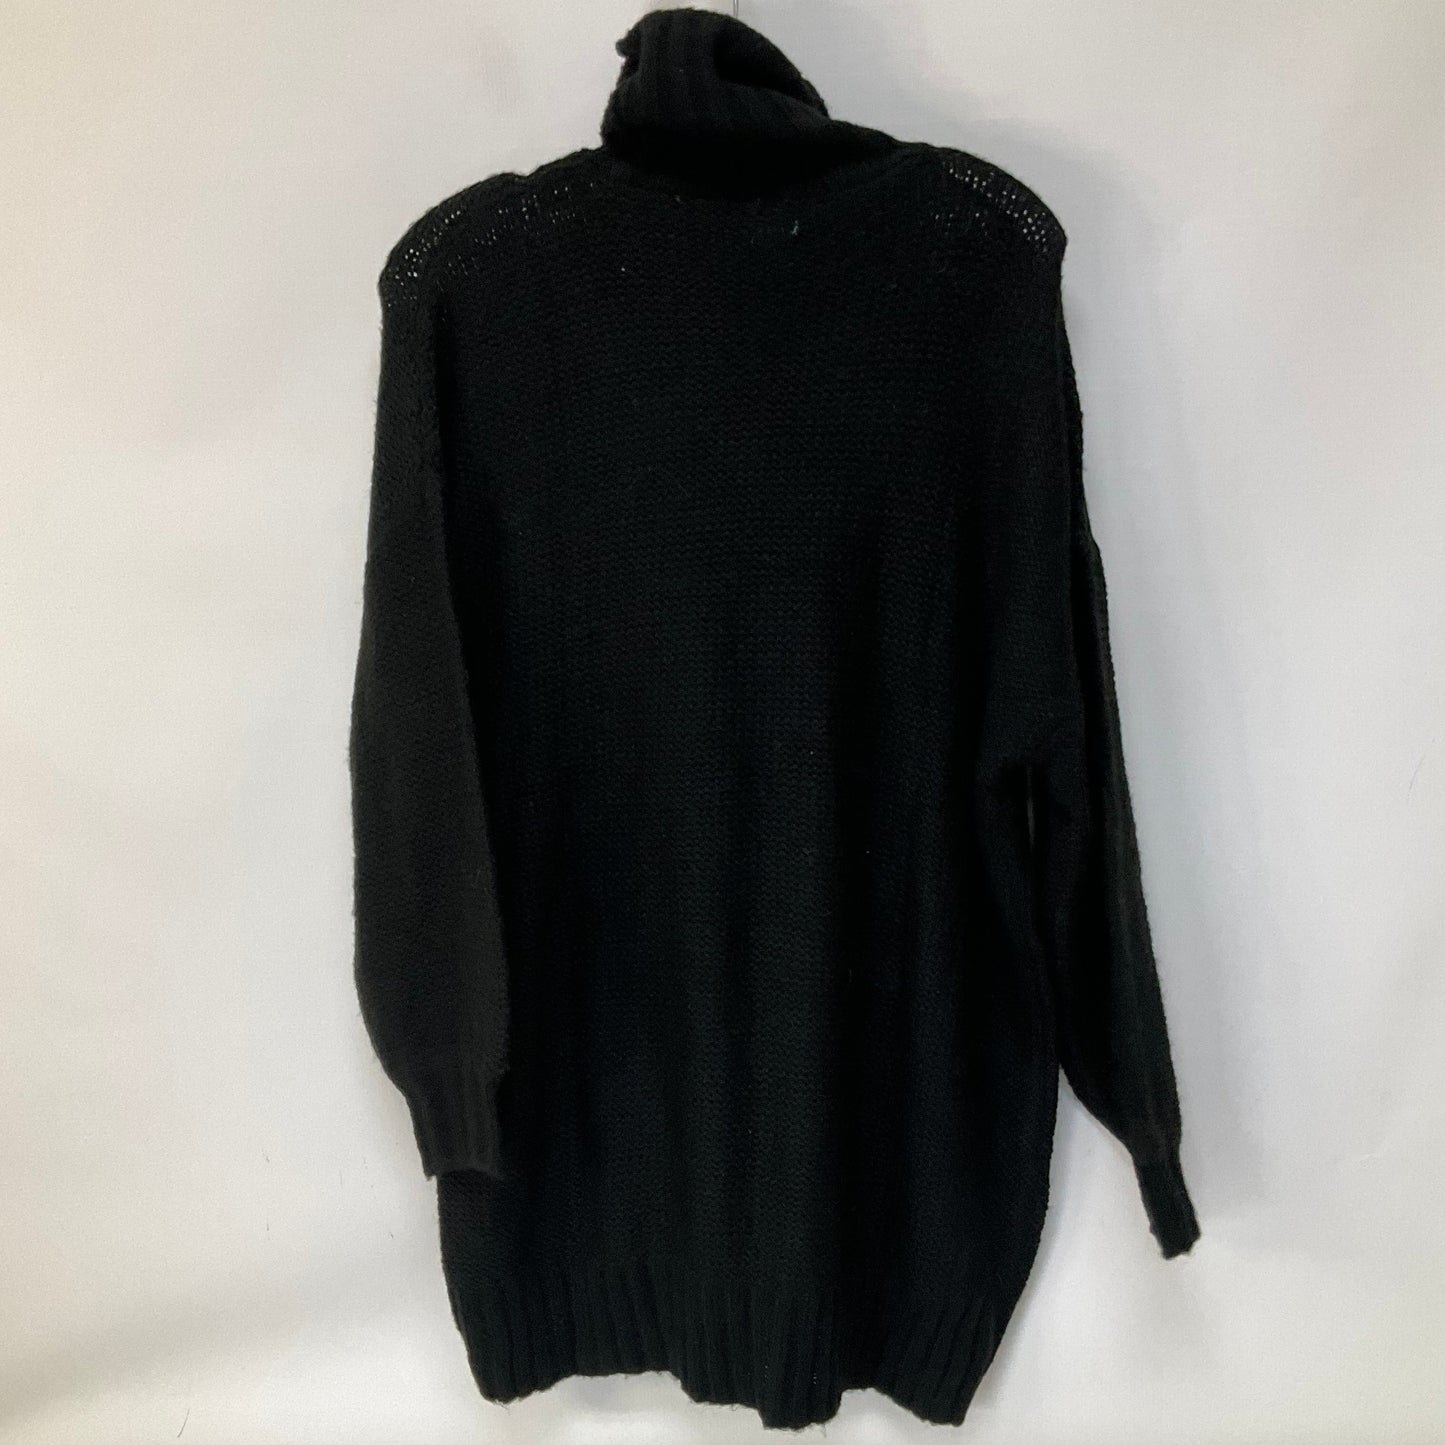 Black Sweater Aerie, Size S